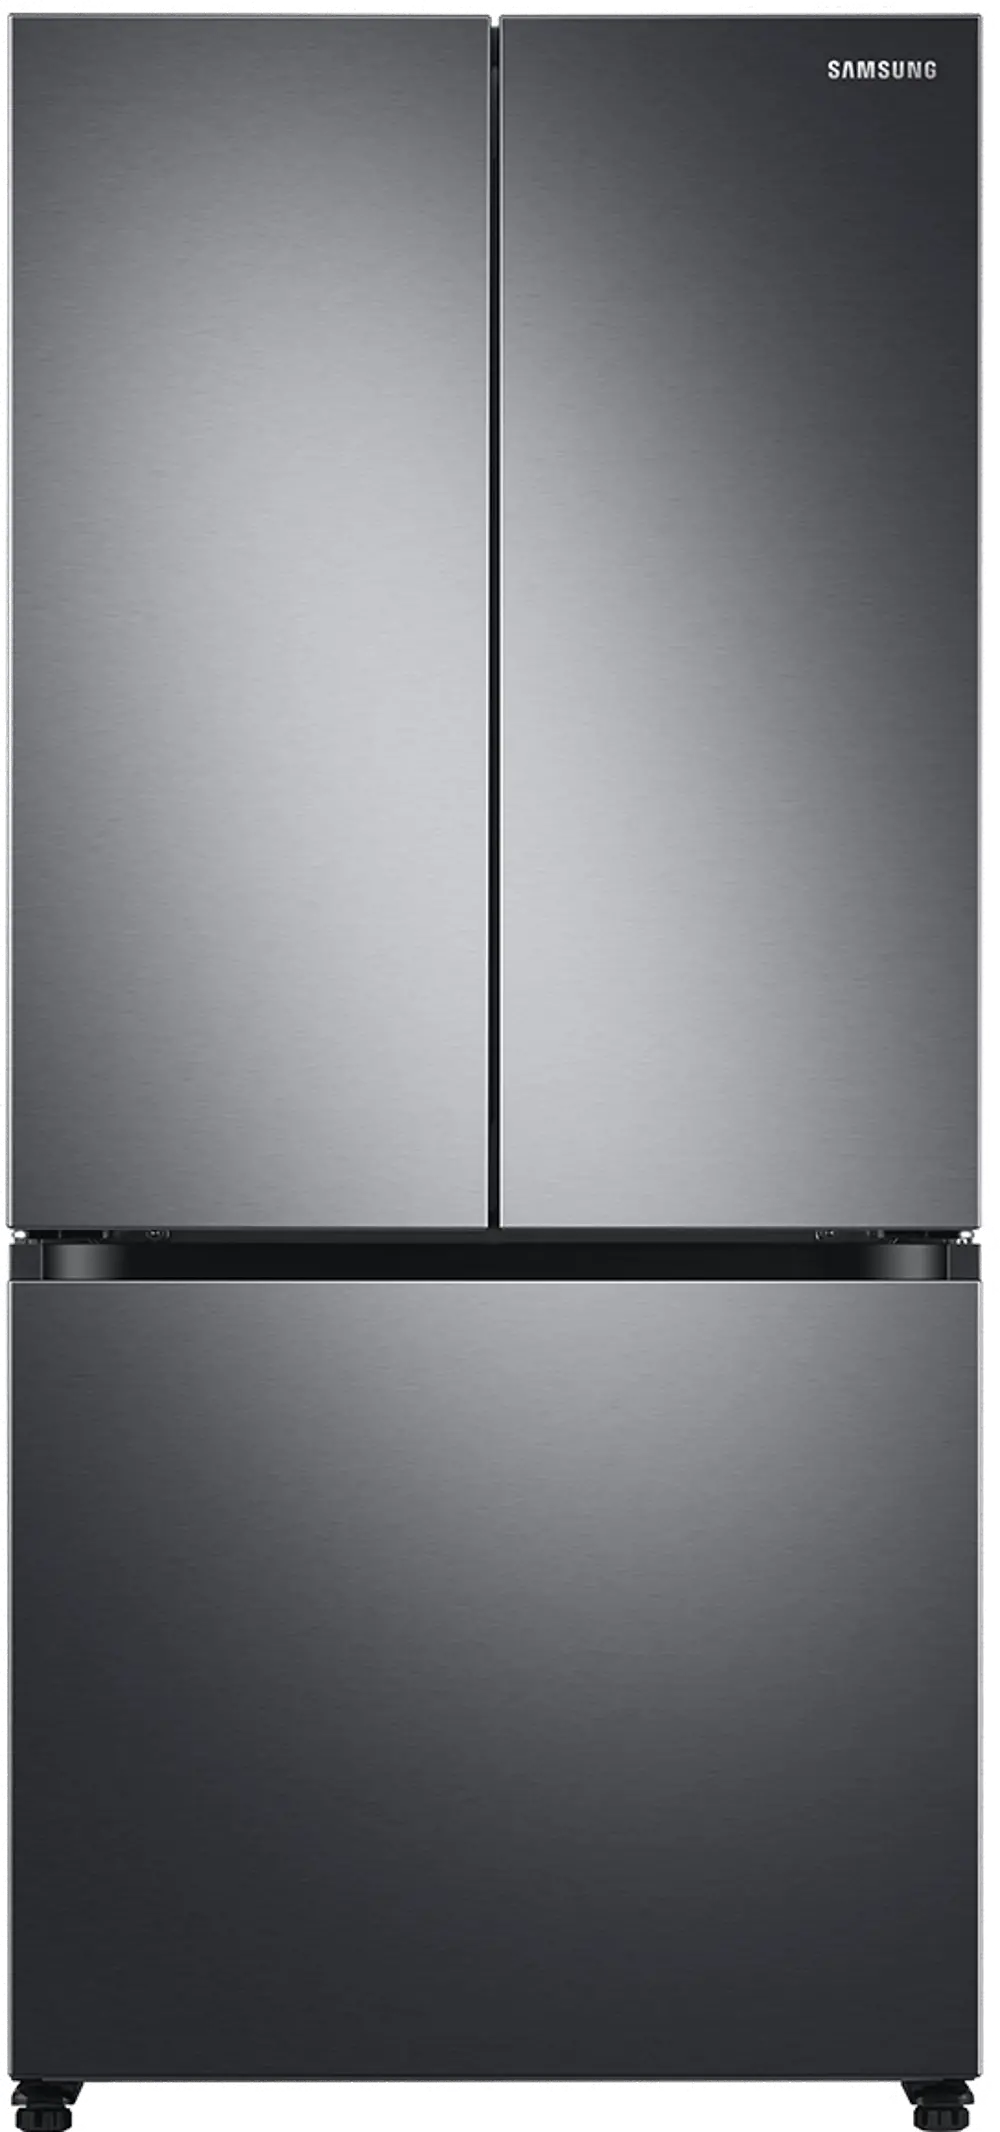 RF18A5101SG Samsung 17.5 cu ft French Door Refrigerator - Counter Depth 33 W Black Stainless Steel-1